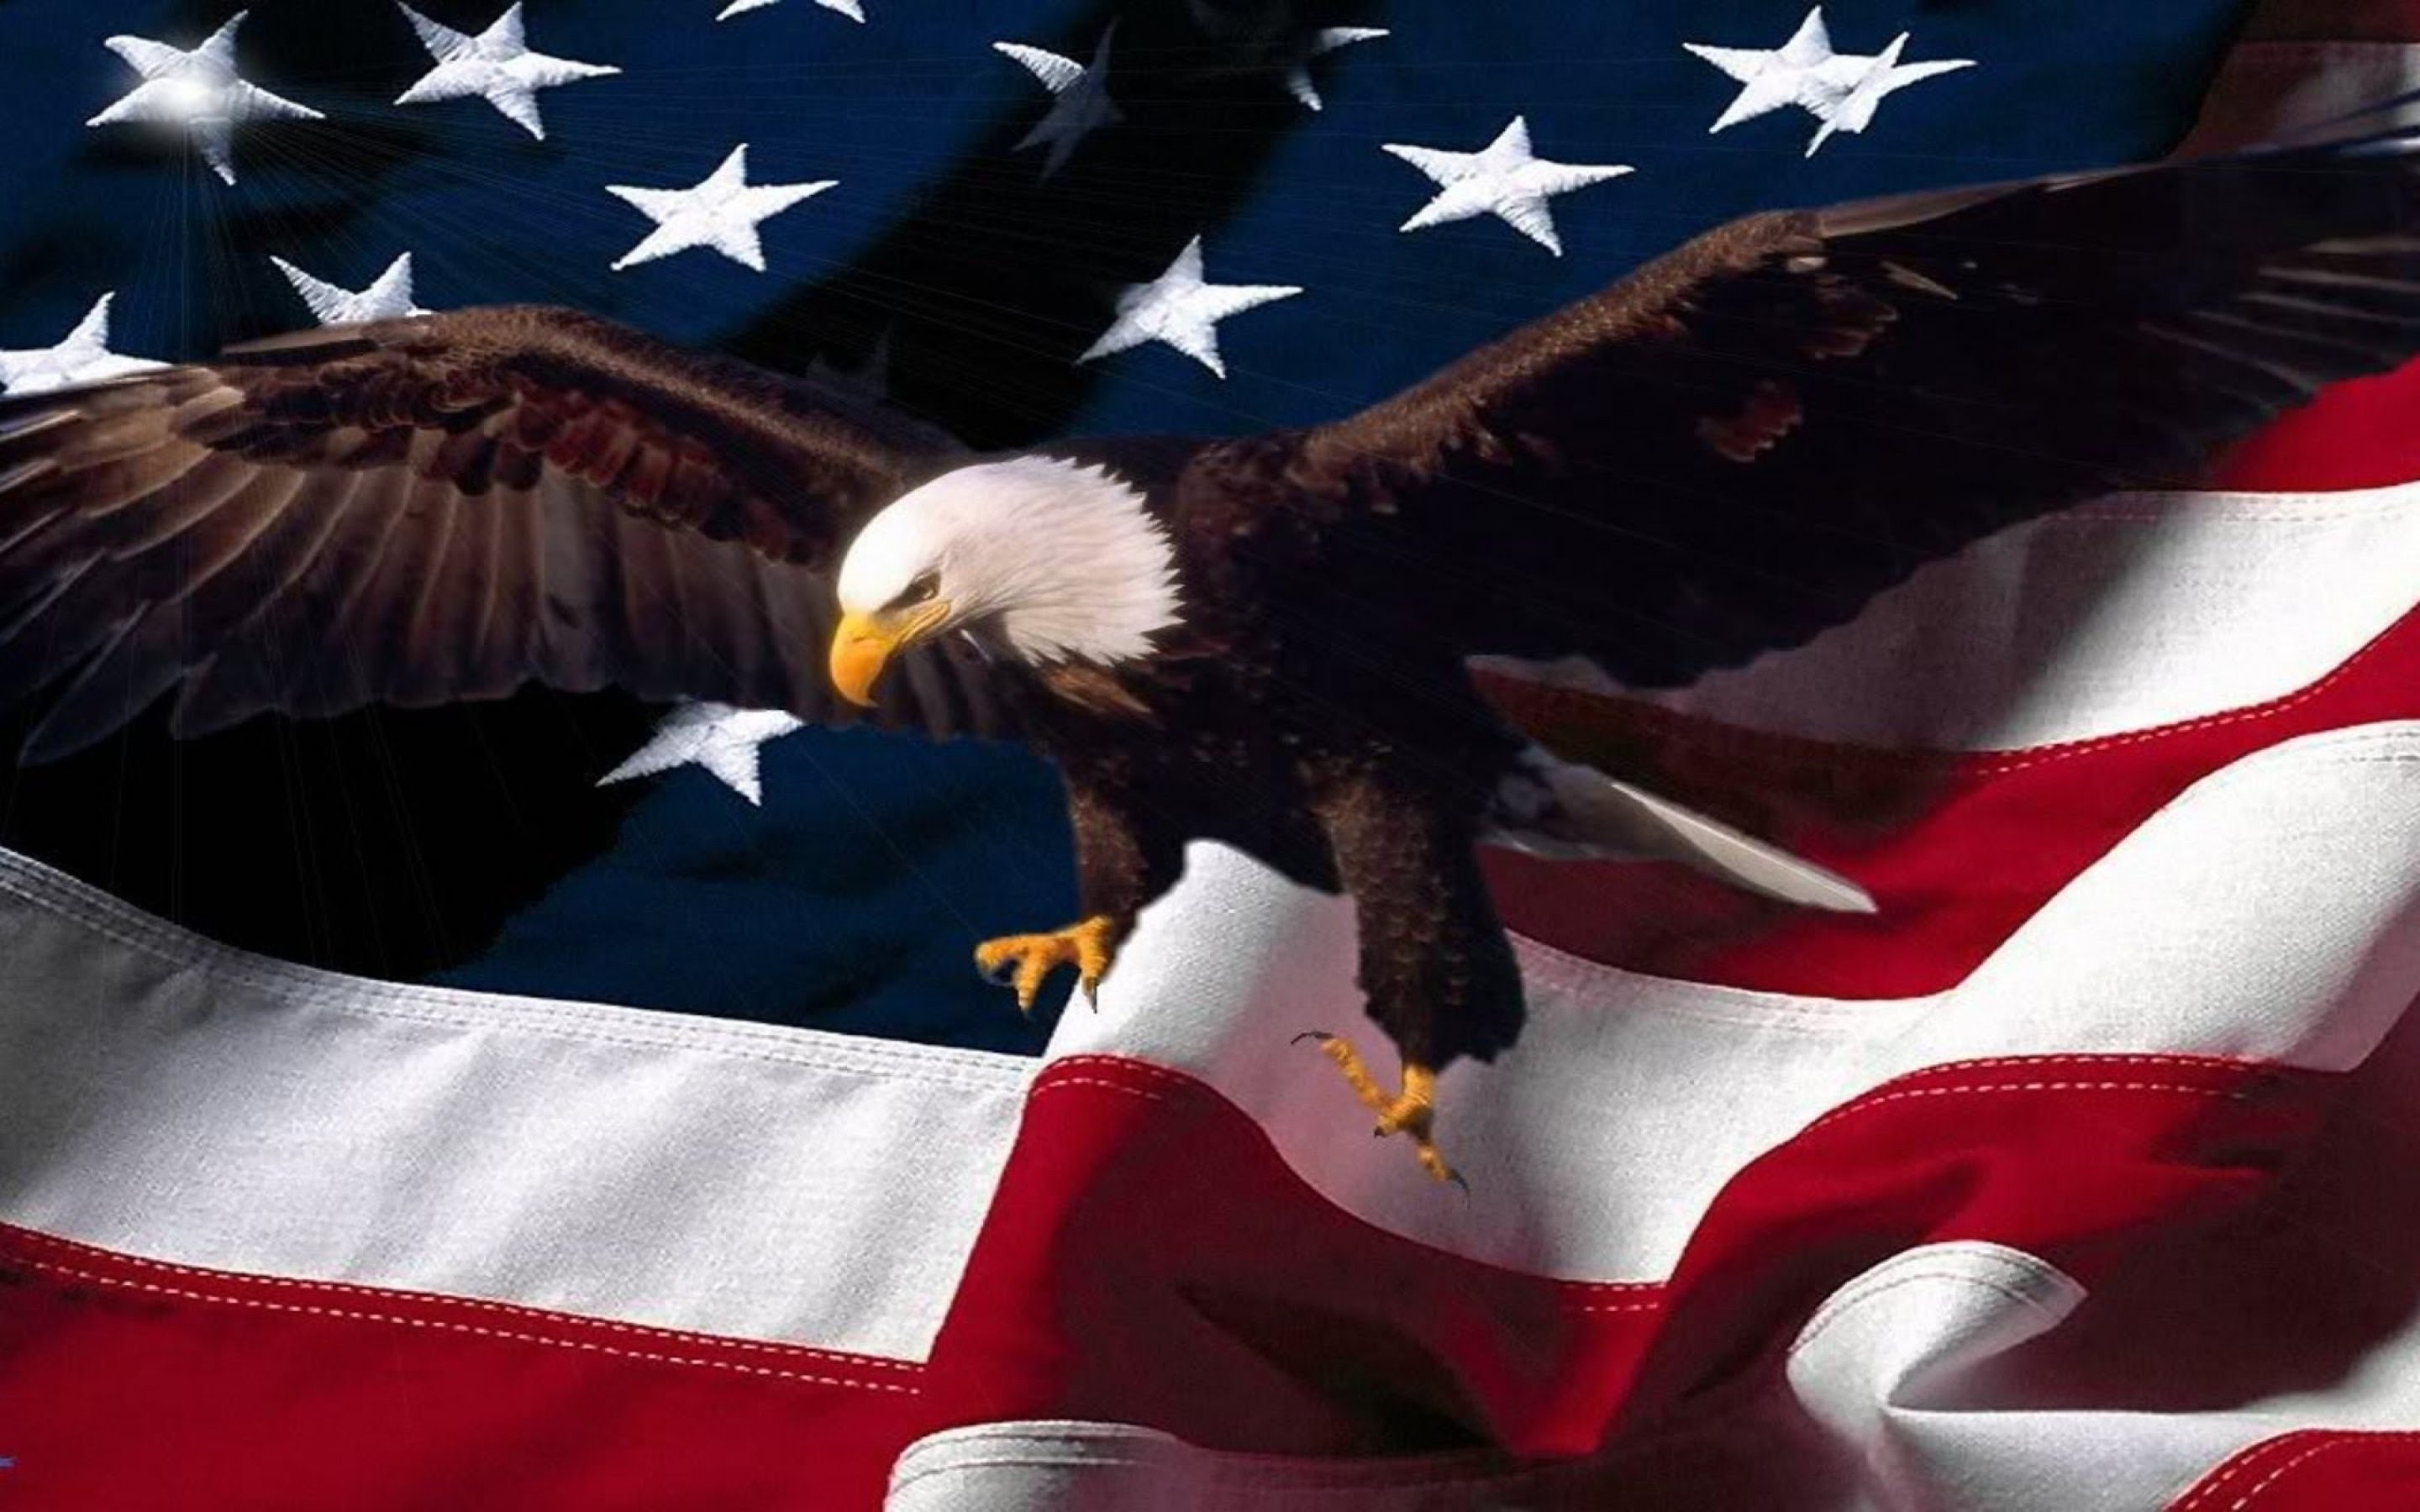 American Flag With Eagle Wallpaper (70+ images)